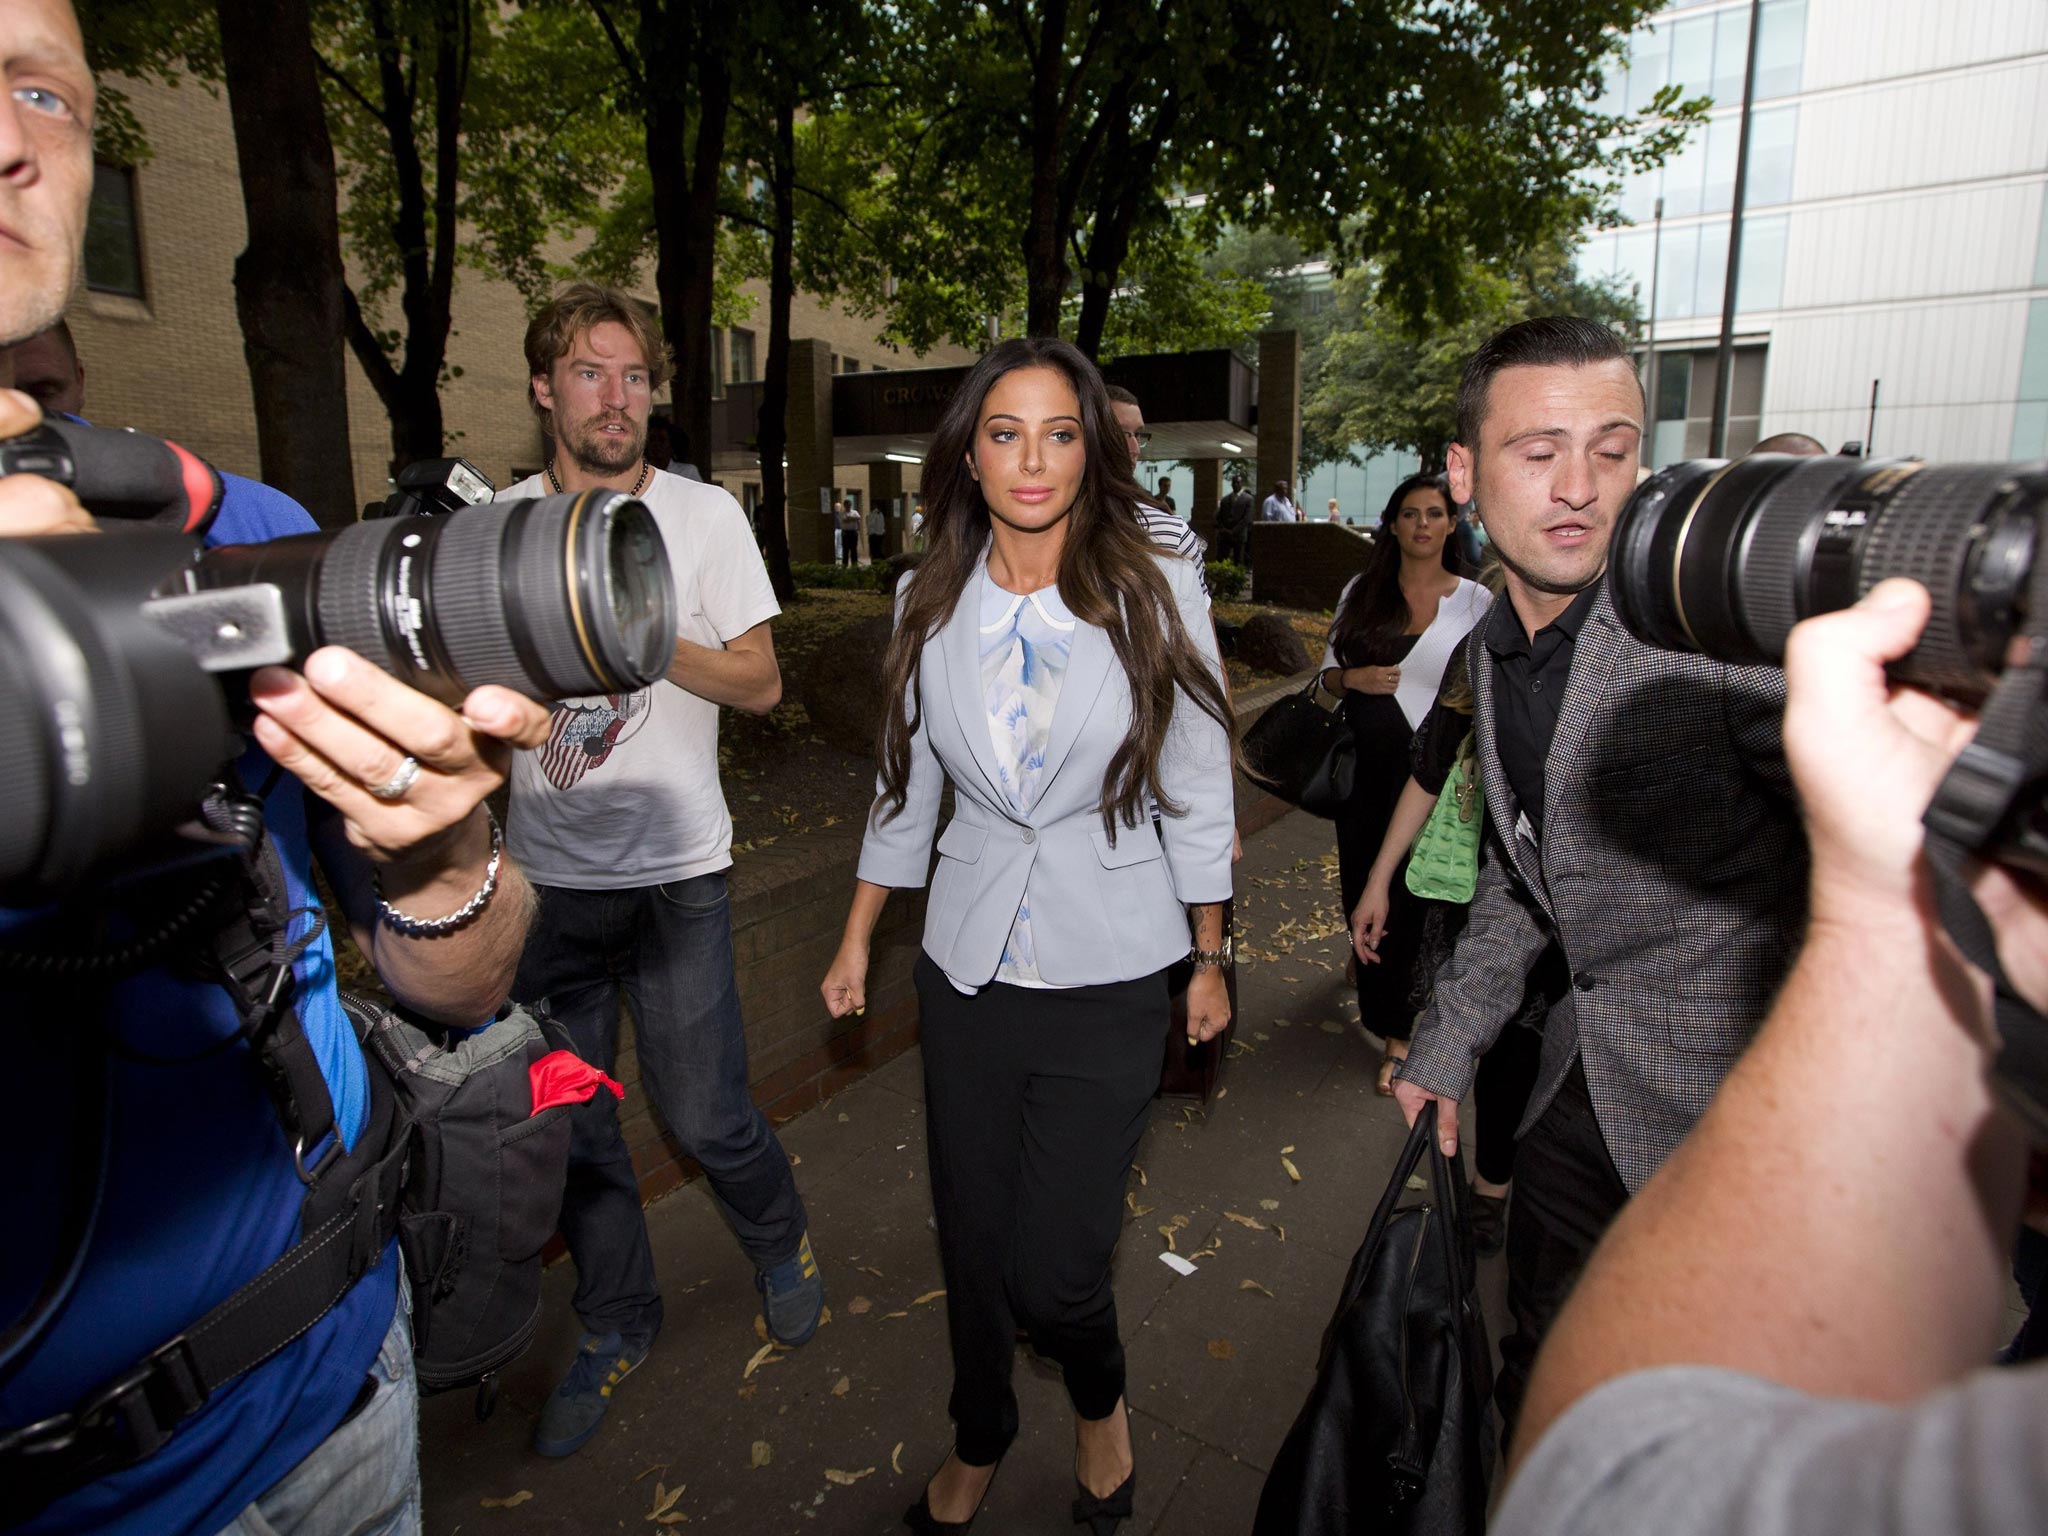 BBC3's documentary 'Tulisa: The Price of Fame' will air only after a week after the trial was thrown out of court